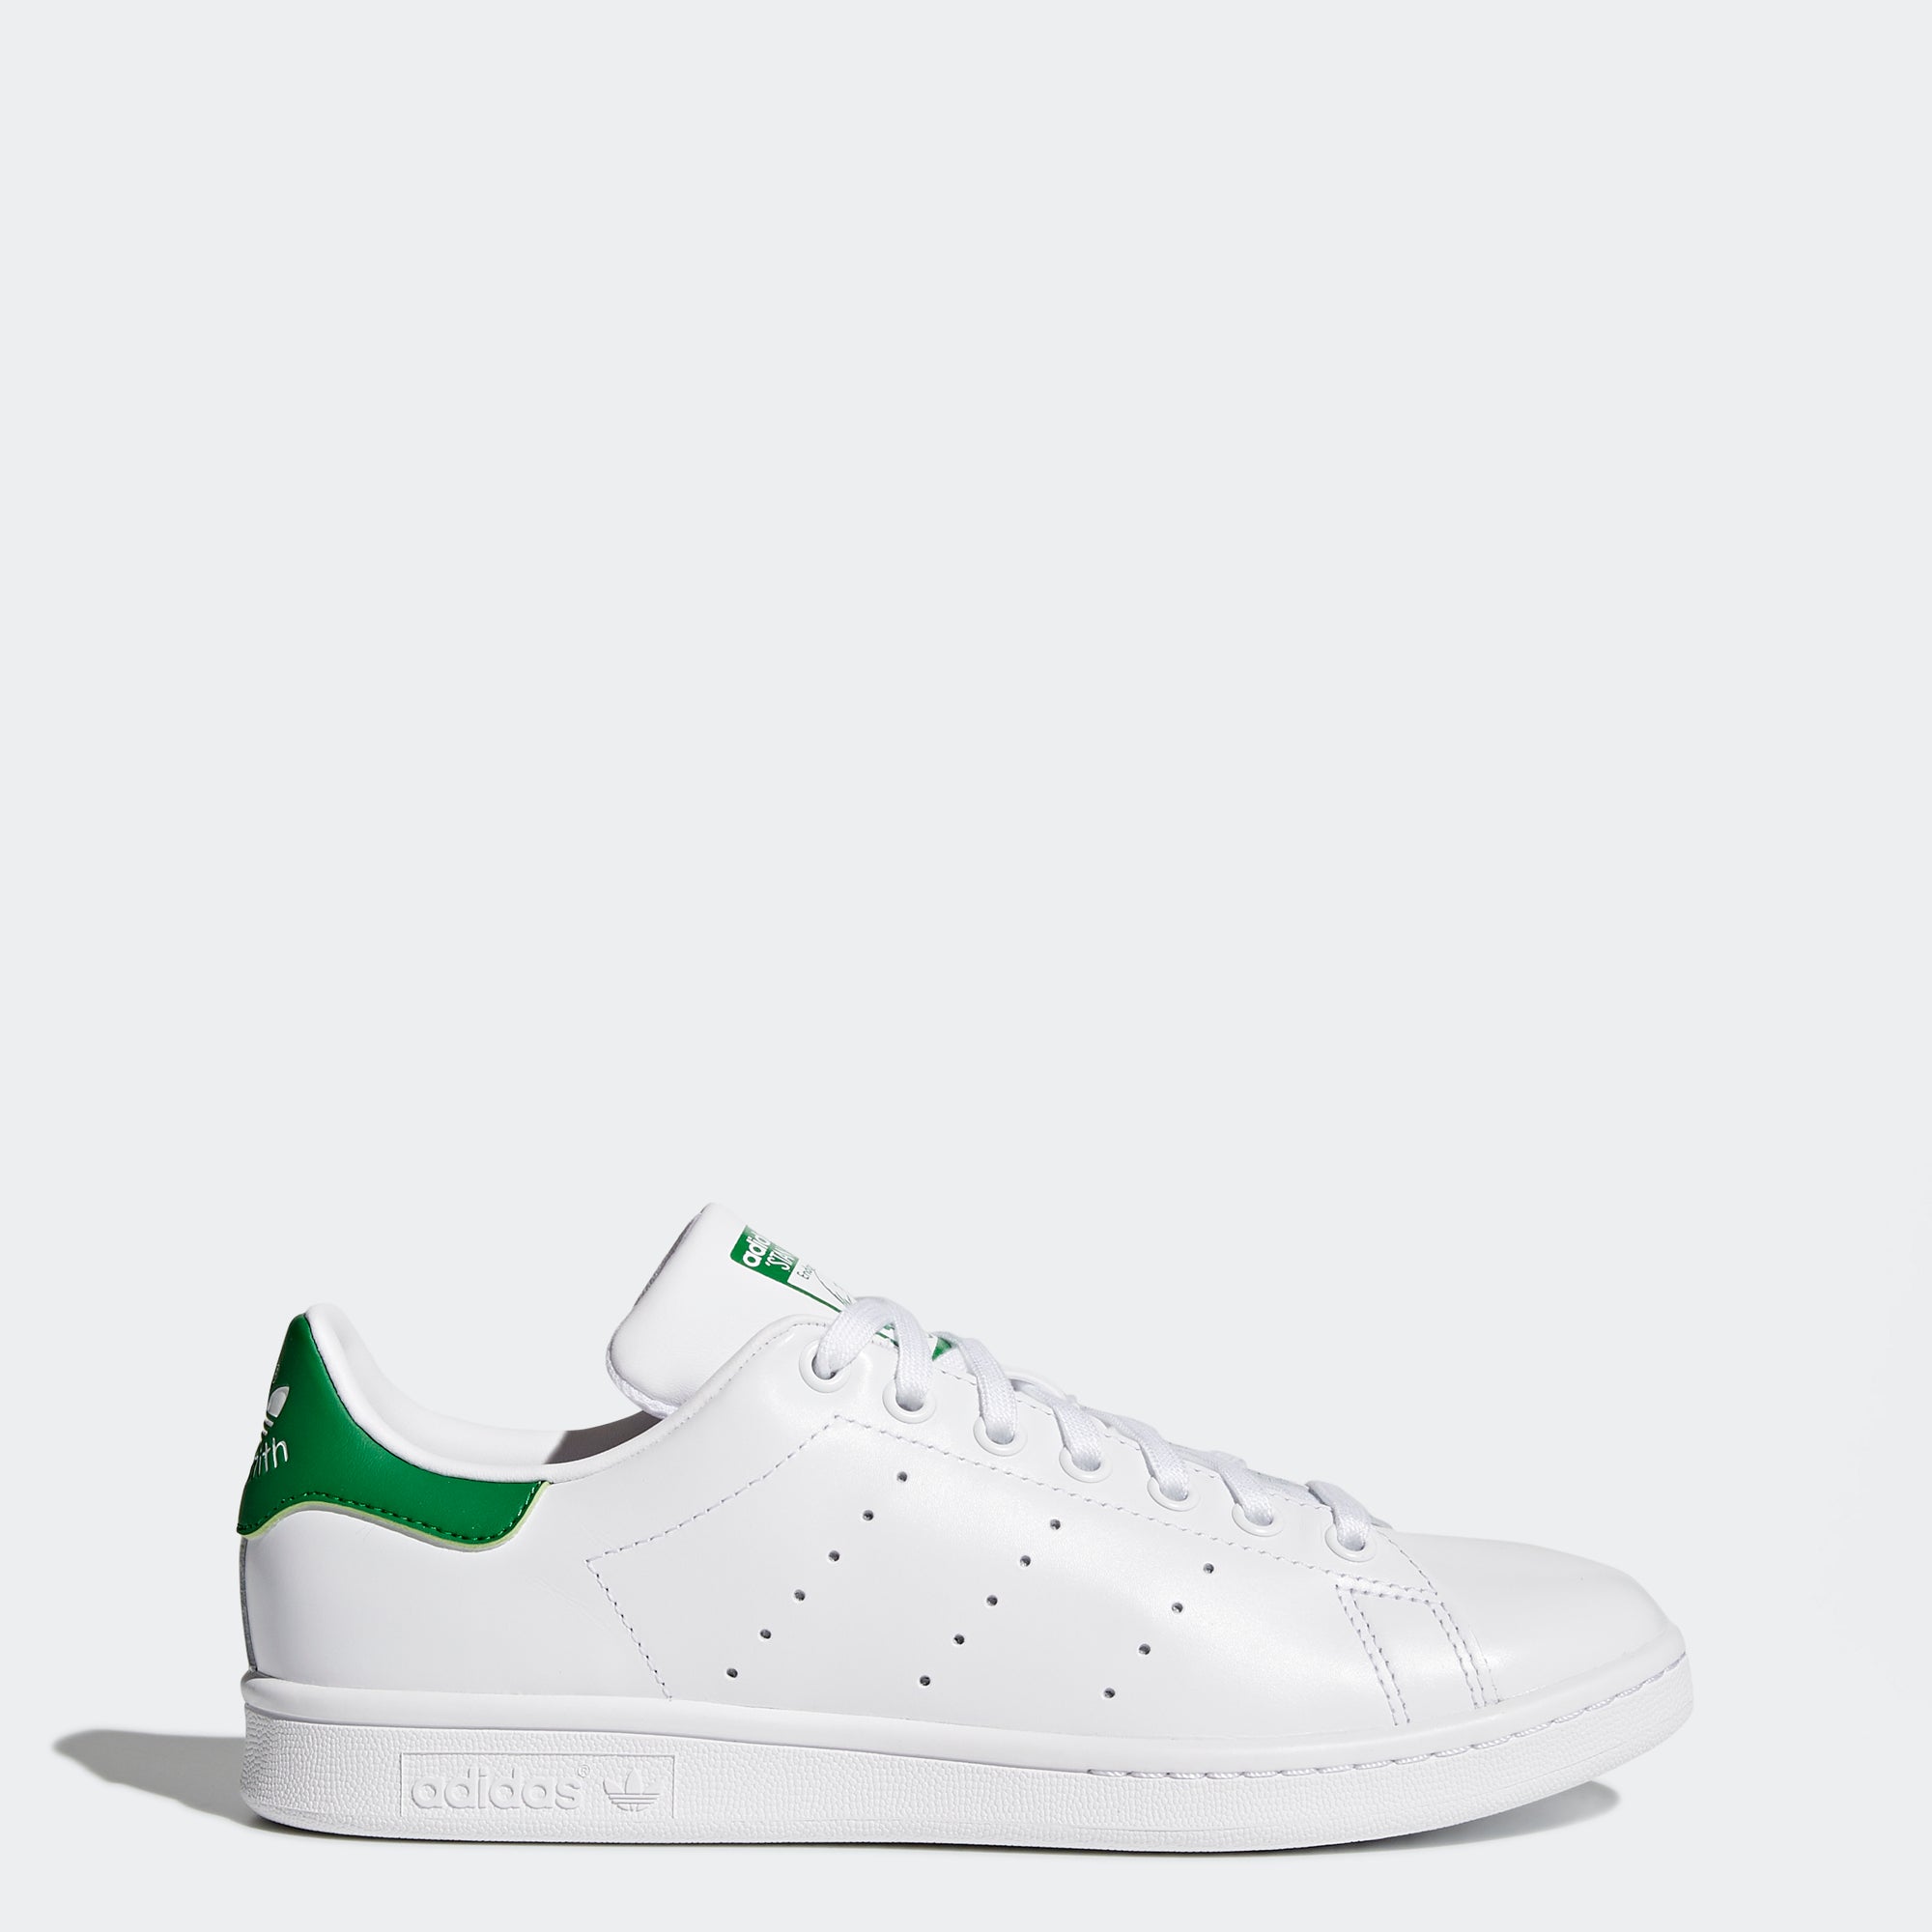 adidas Stan Smith Shoes White/Green M20324 | Chicago City Sports